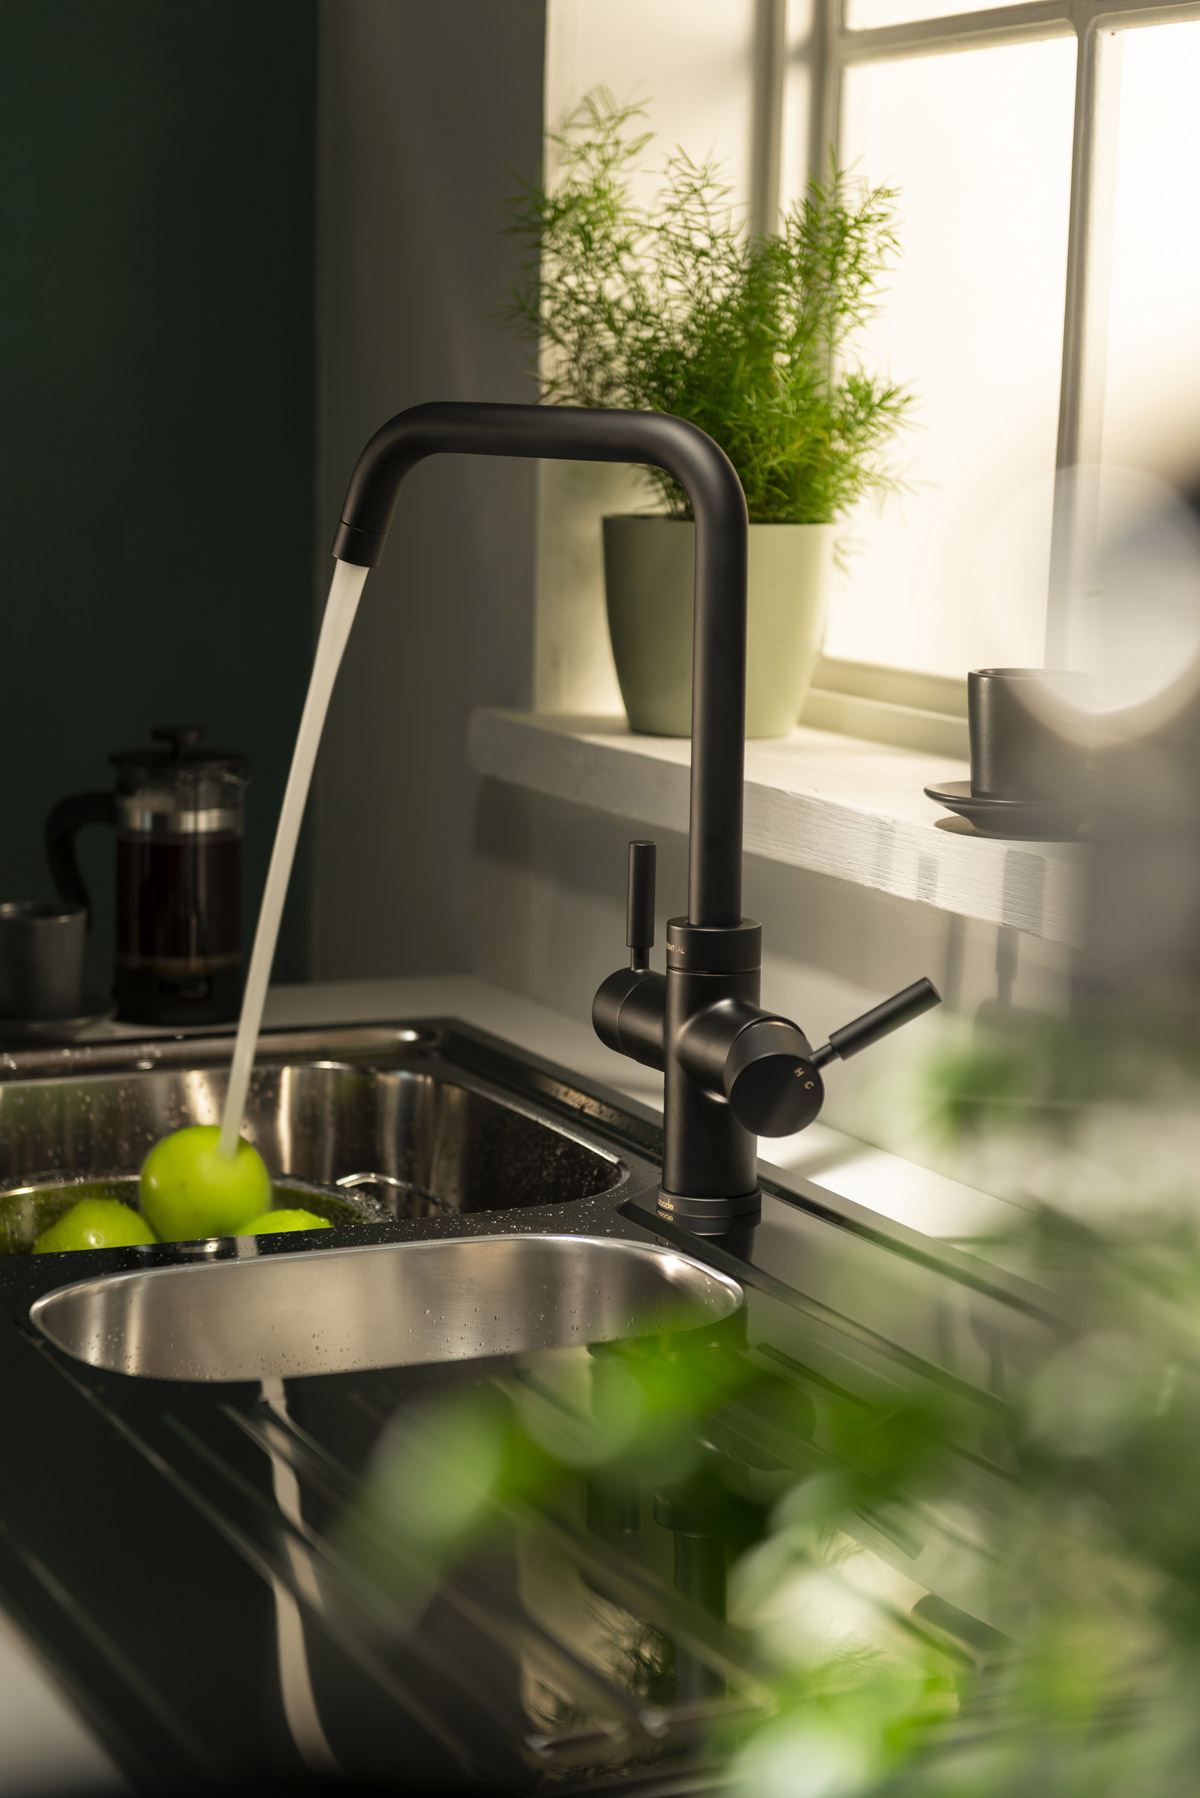 tap and sink trends, Abode Predicts Trends for Home Appliances in 2022